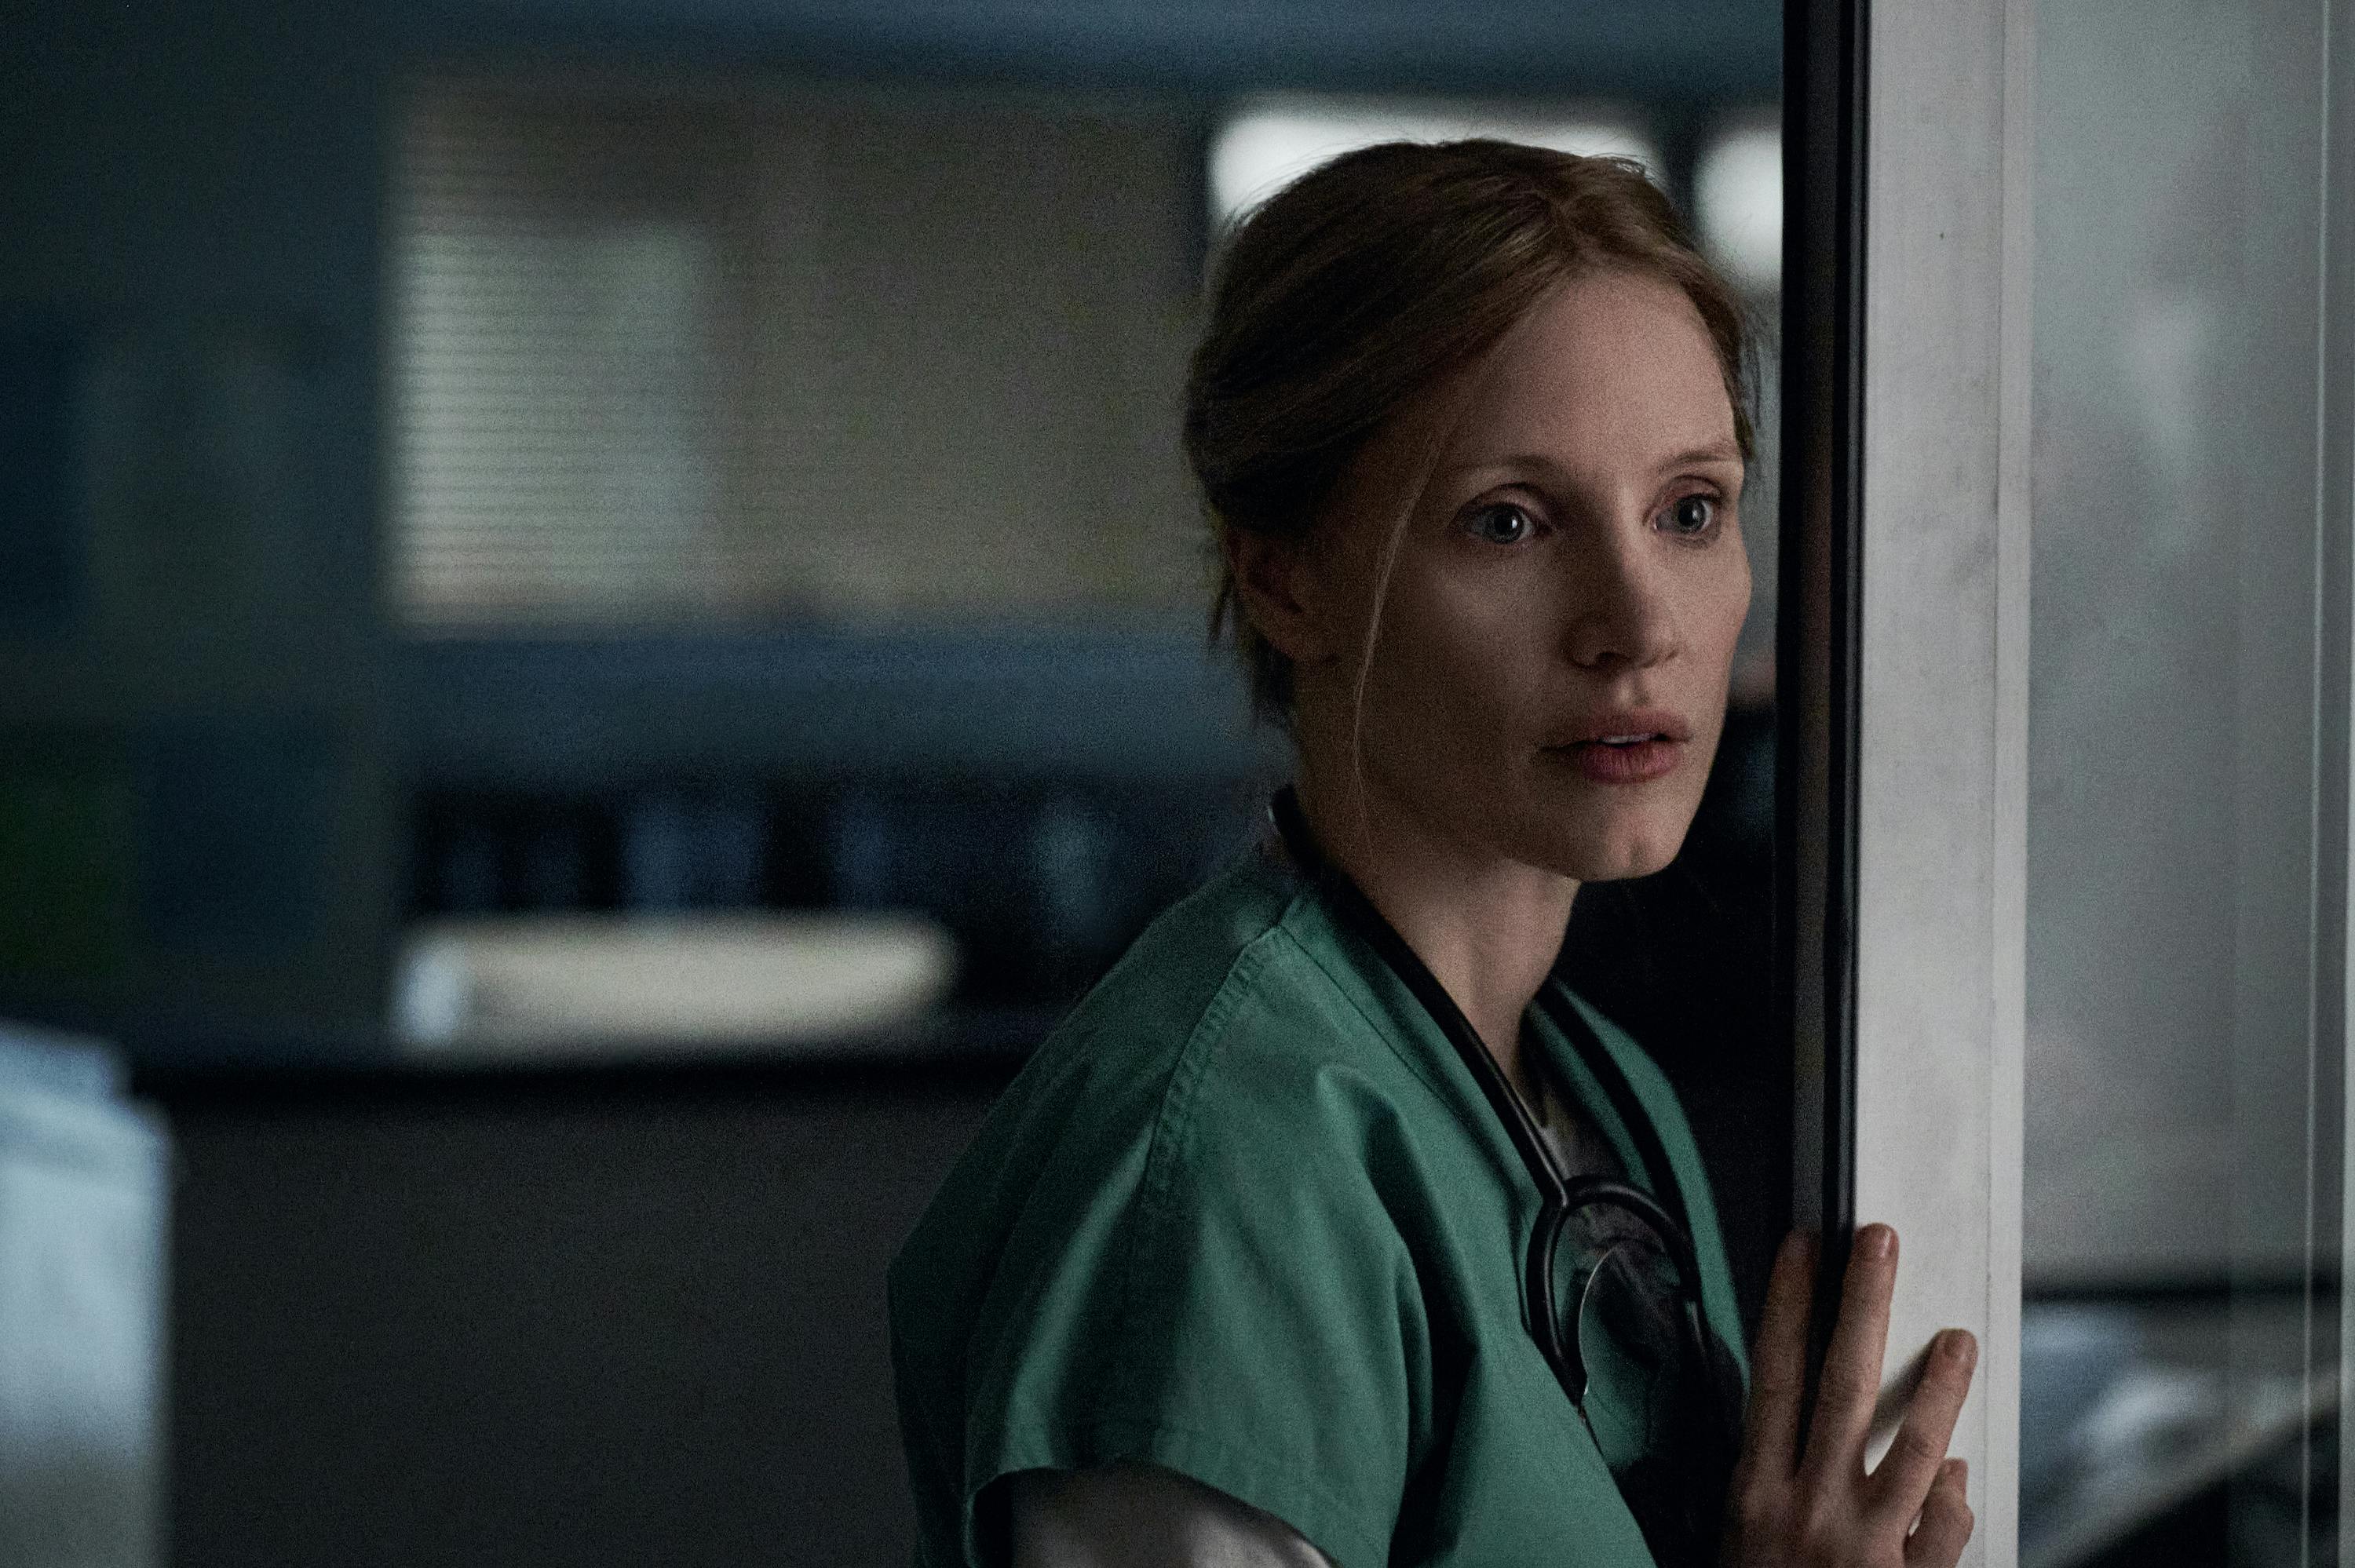 Jessica Chastain wears green scrubs and leans on a grey wall.